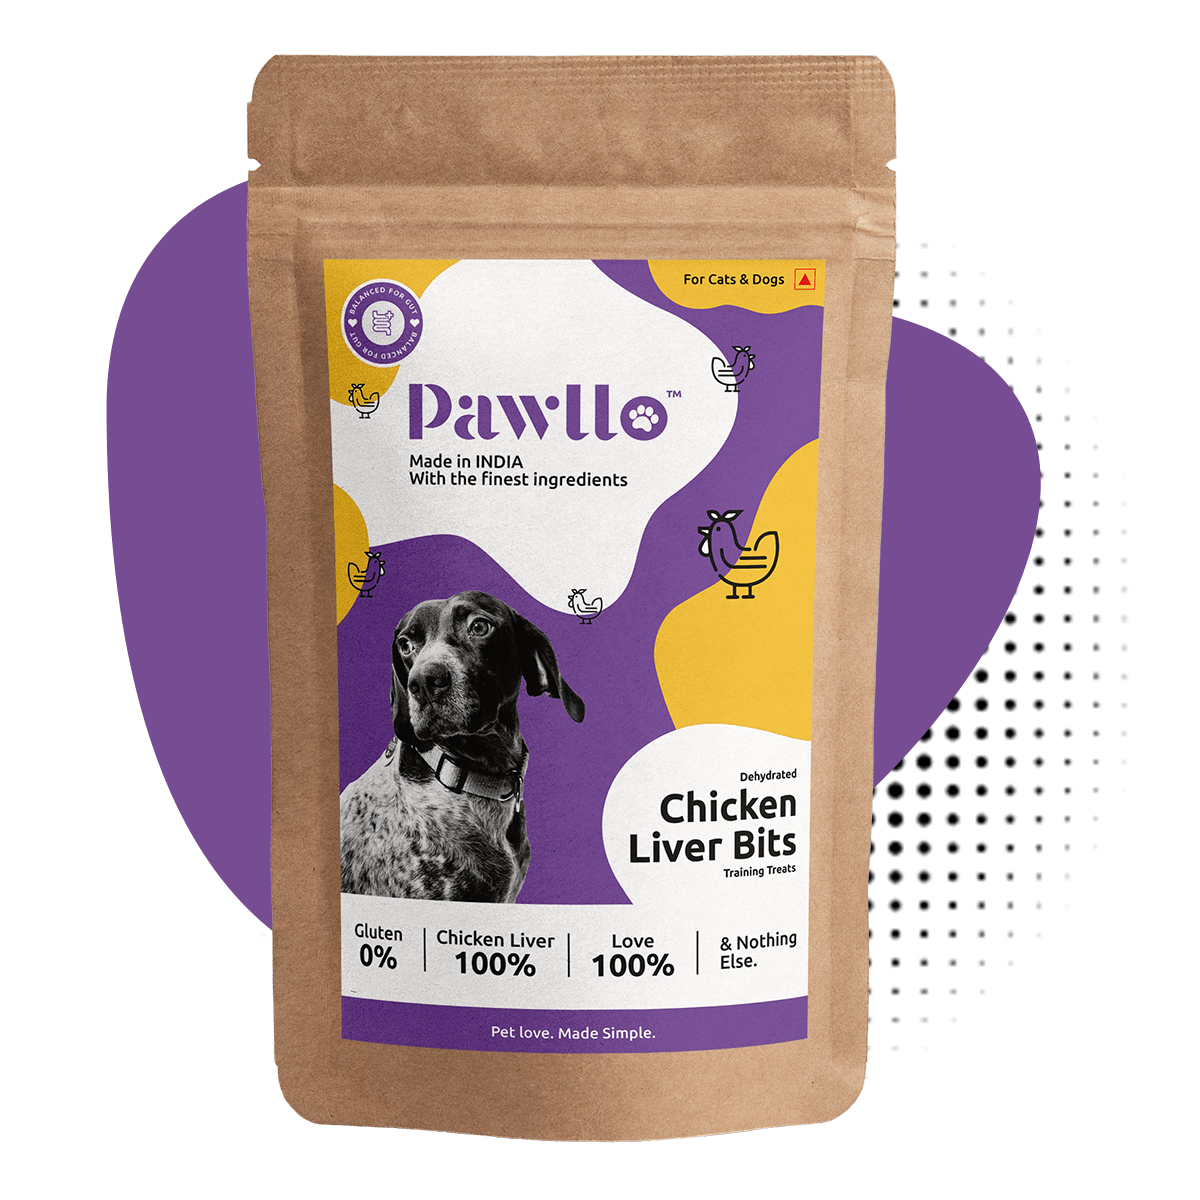 Chicken Liver Bits - Dehydrated Natural Taurine and Protein Loaded Snack for Cats and Dogs